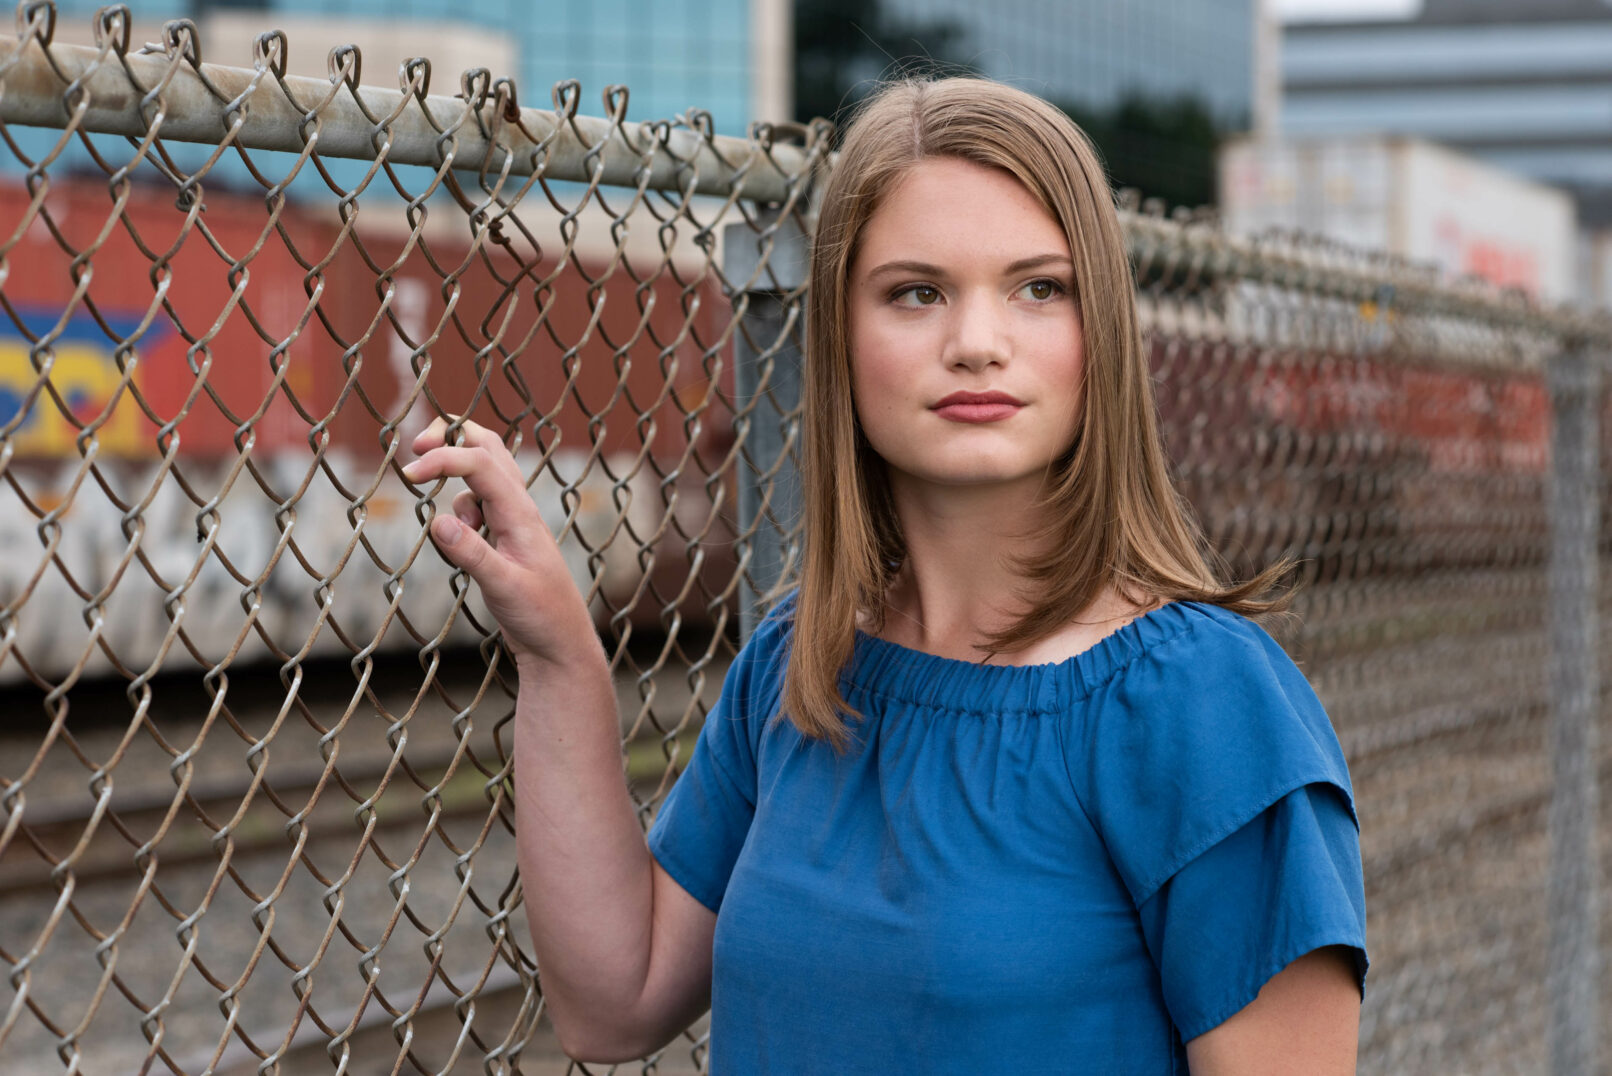 young woman headshot standing next to chain link fence wearing a blue top. Train and office buildings in background.